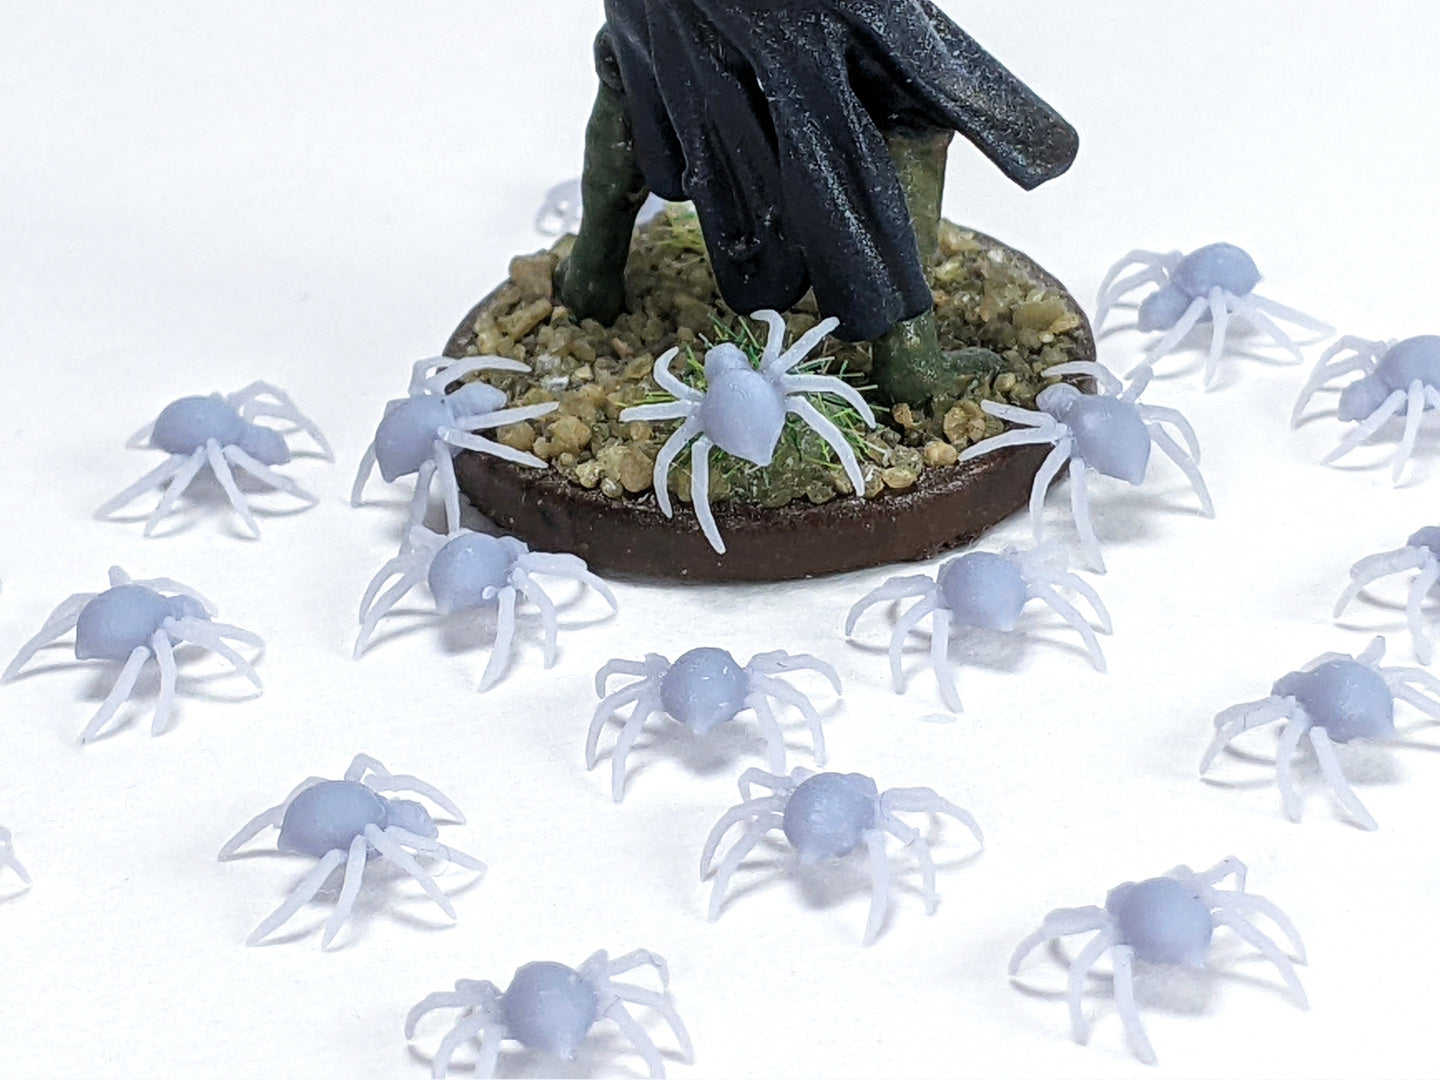 Scatter Spiders